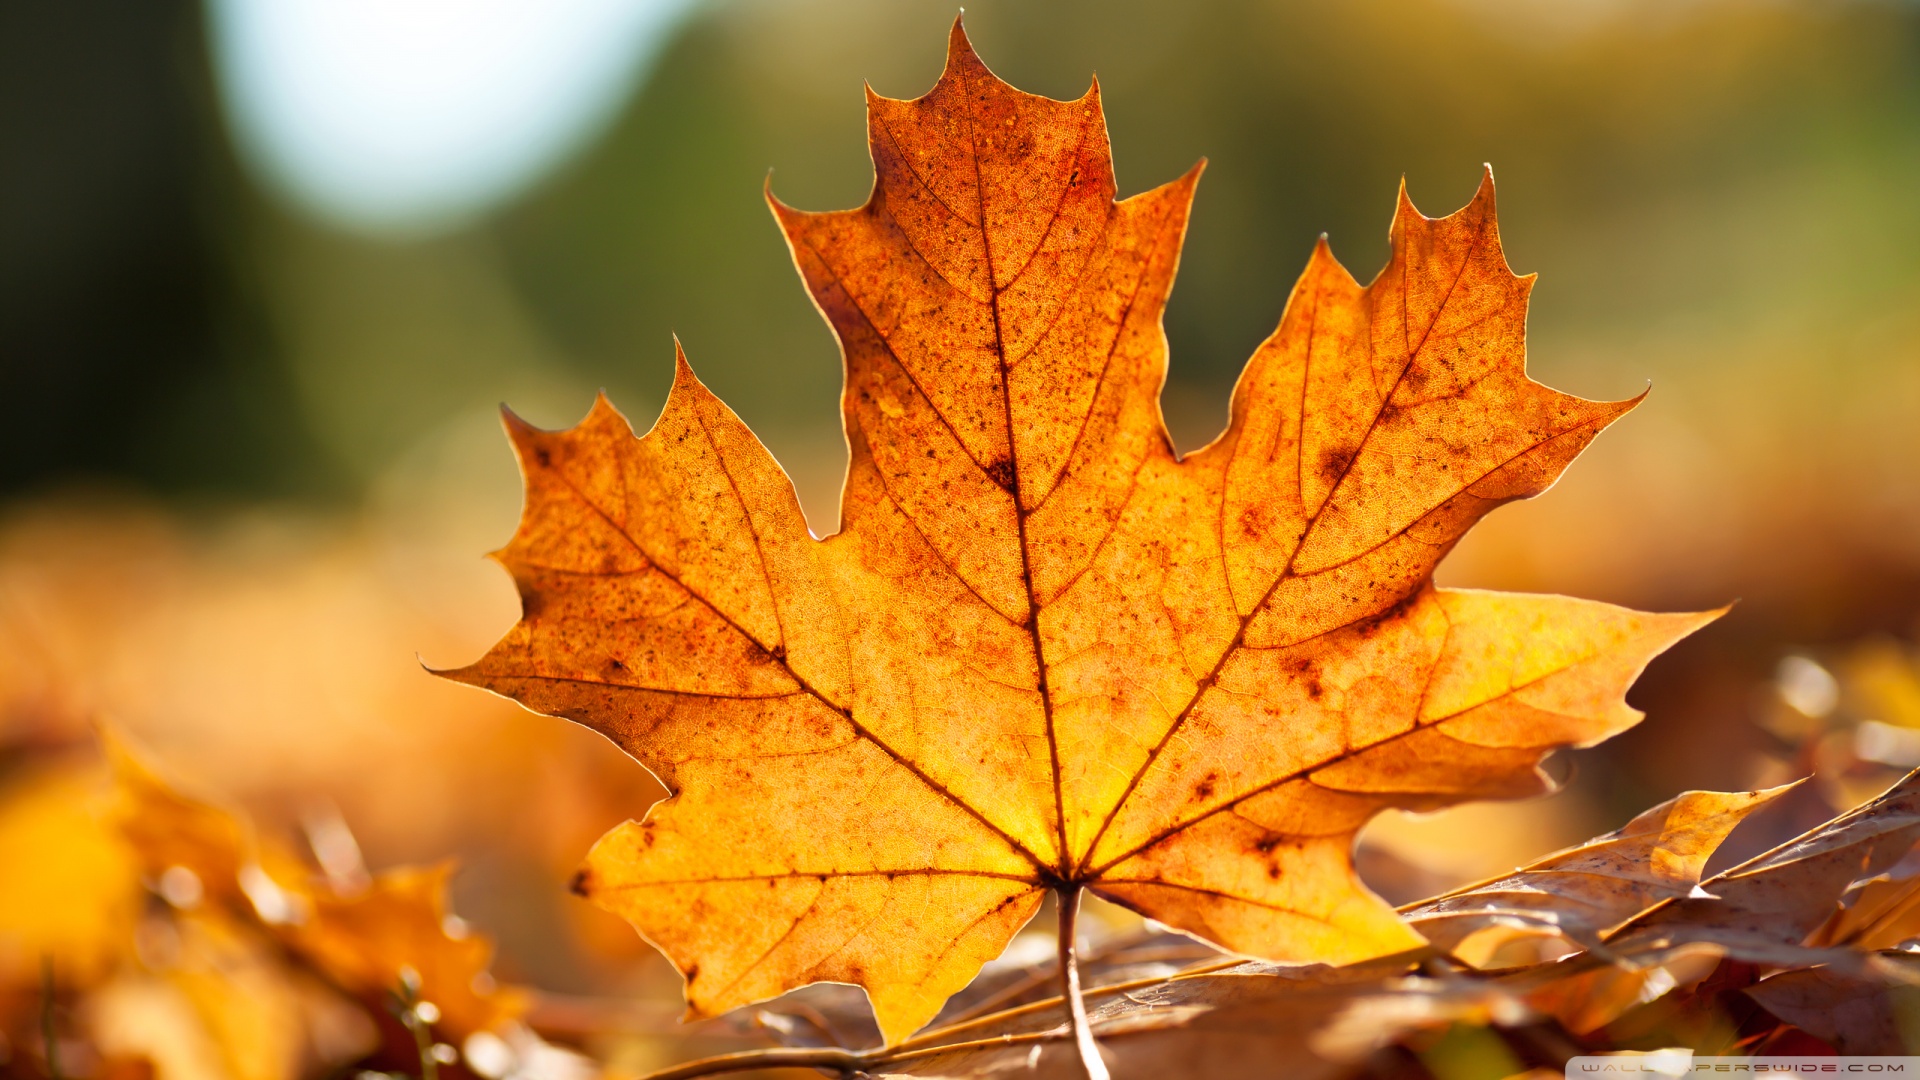 Autumn Maple Leaves And Their Beauty In These Wallpaper